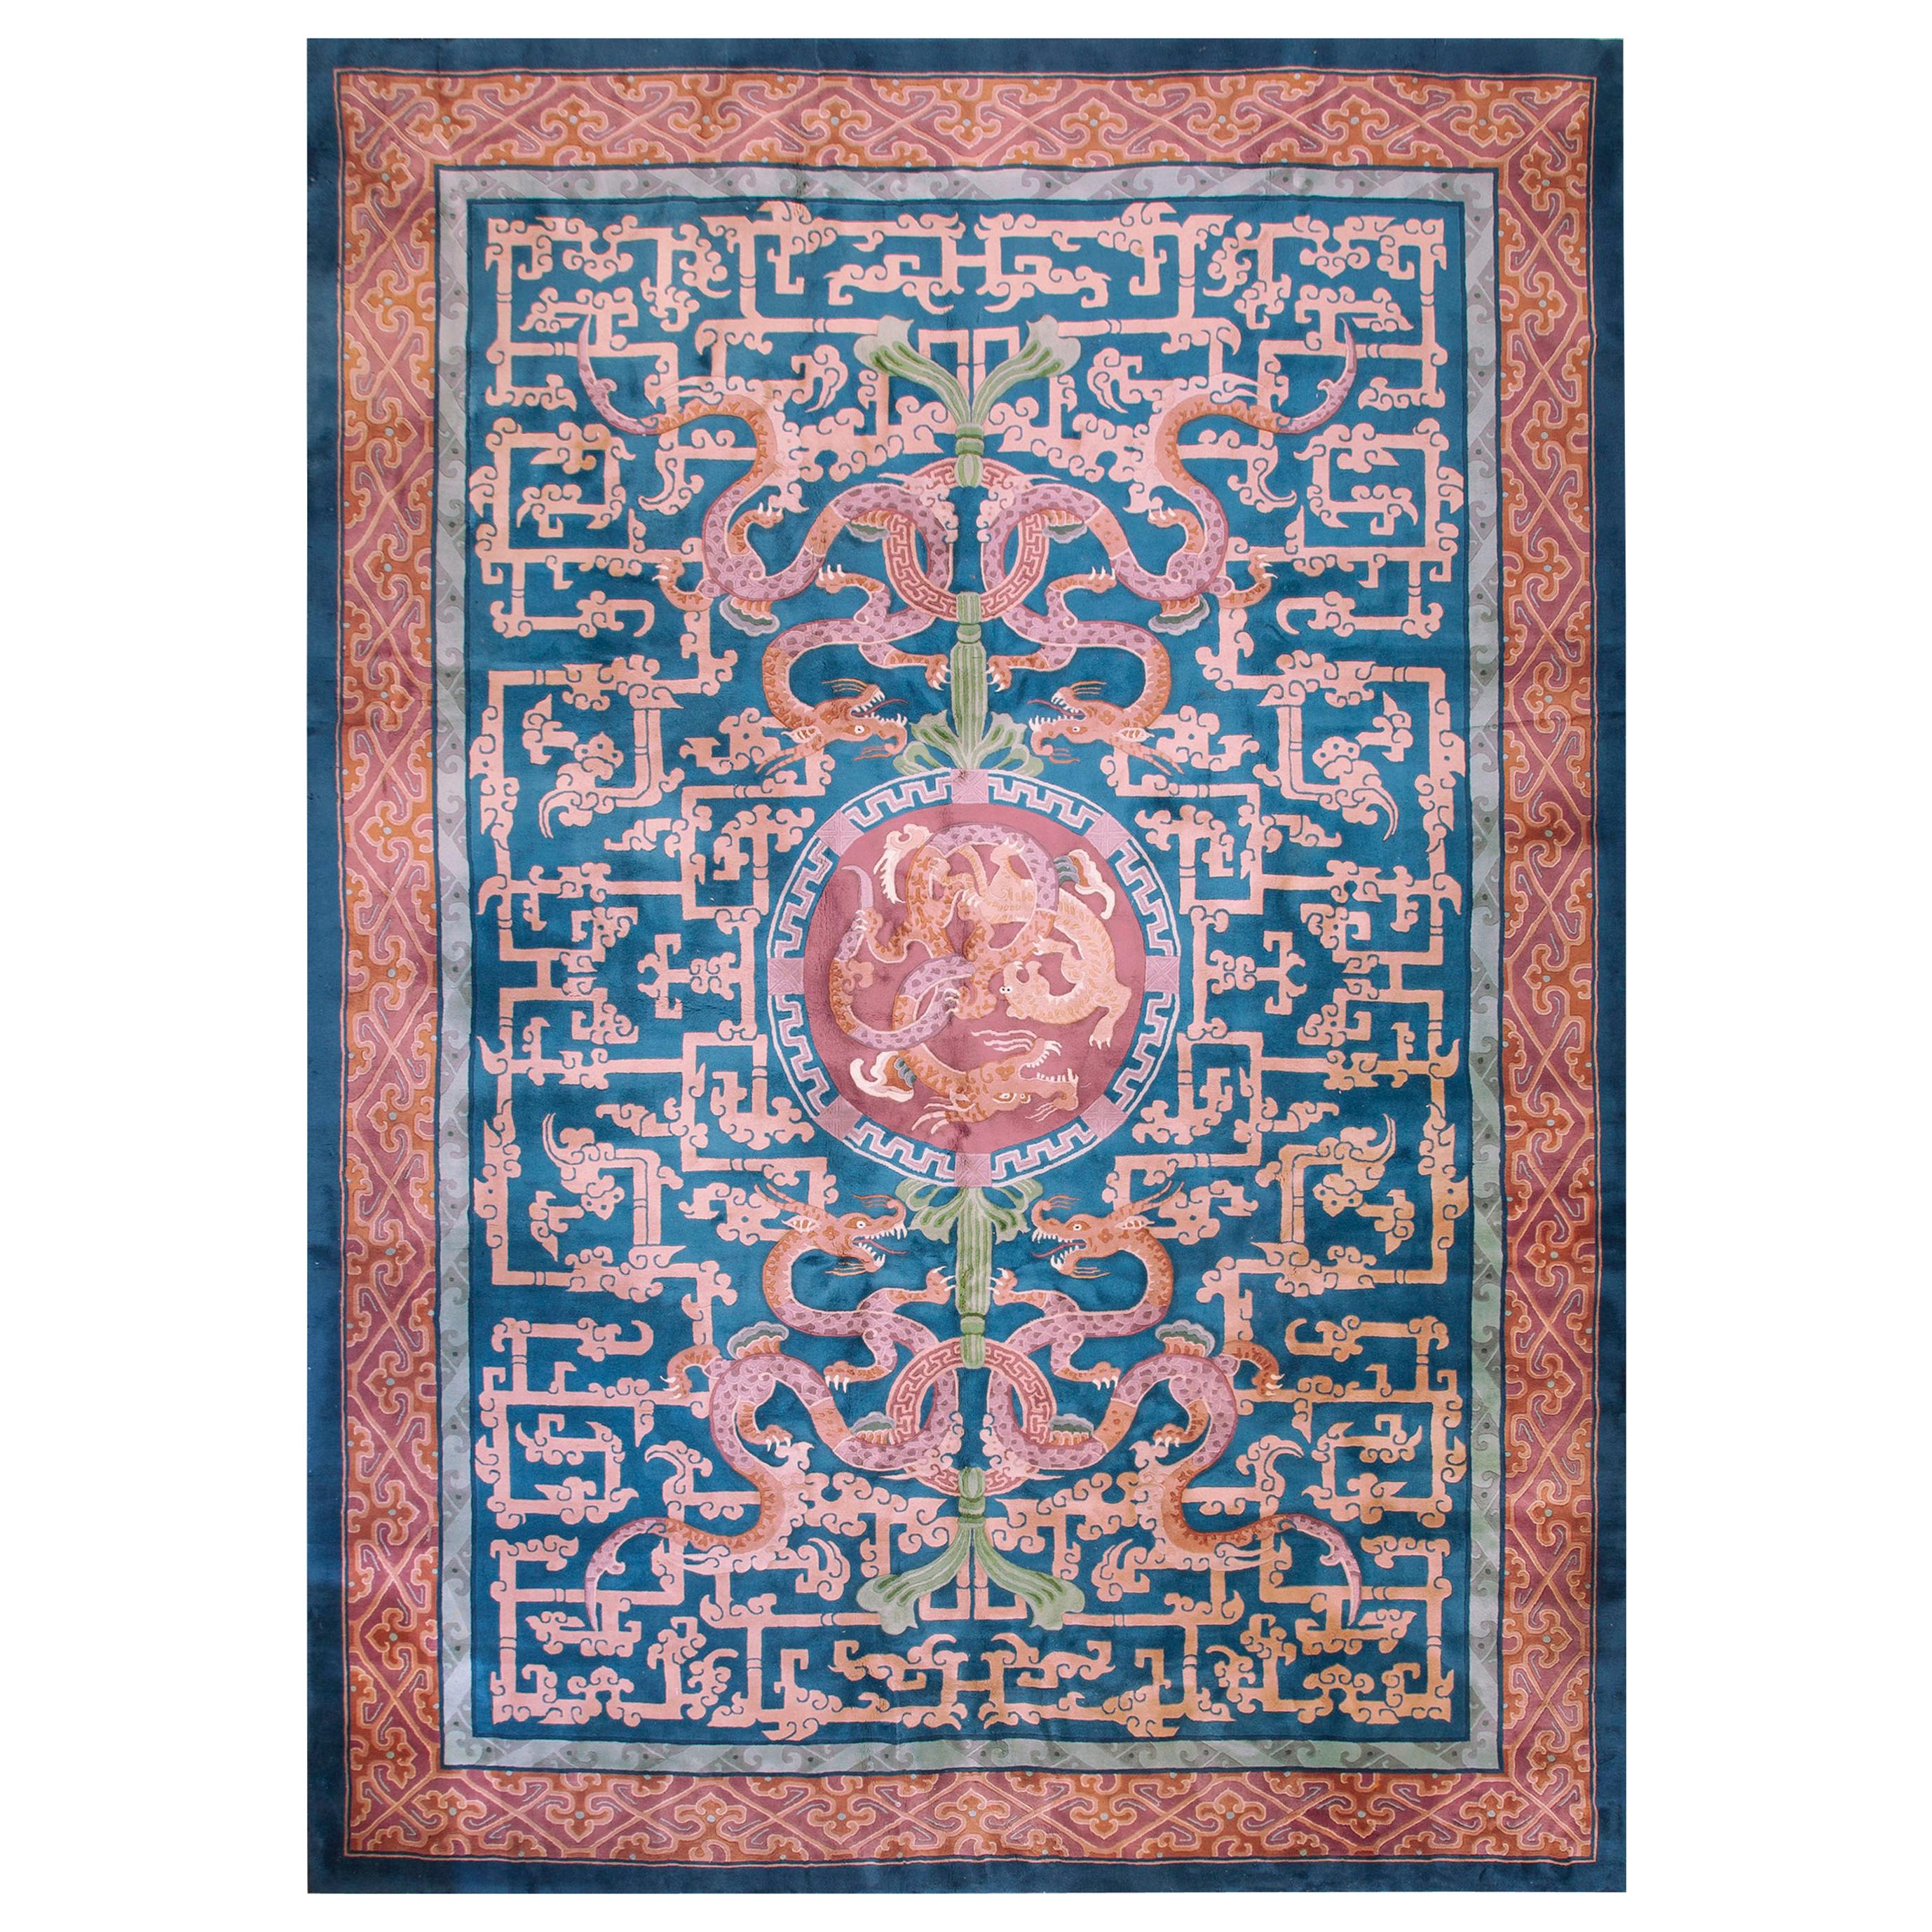 1930s Chinese Art Deco Carpet ( 10' x 14'4" - 305 x 437 ) For Sale